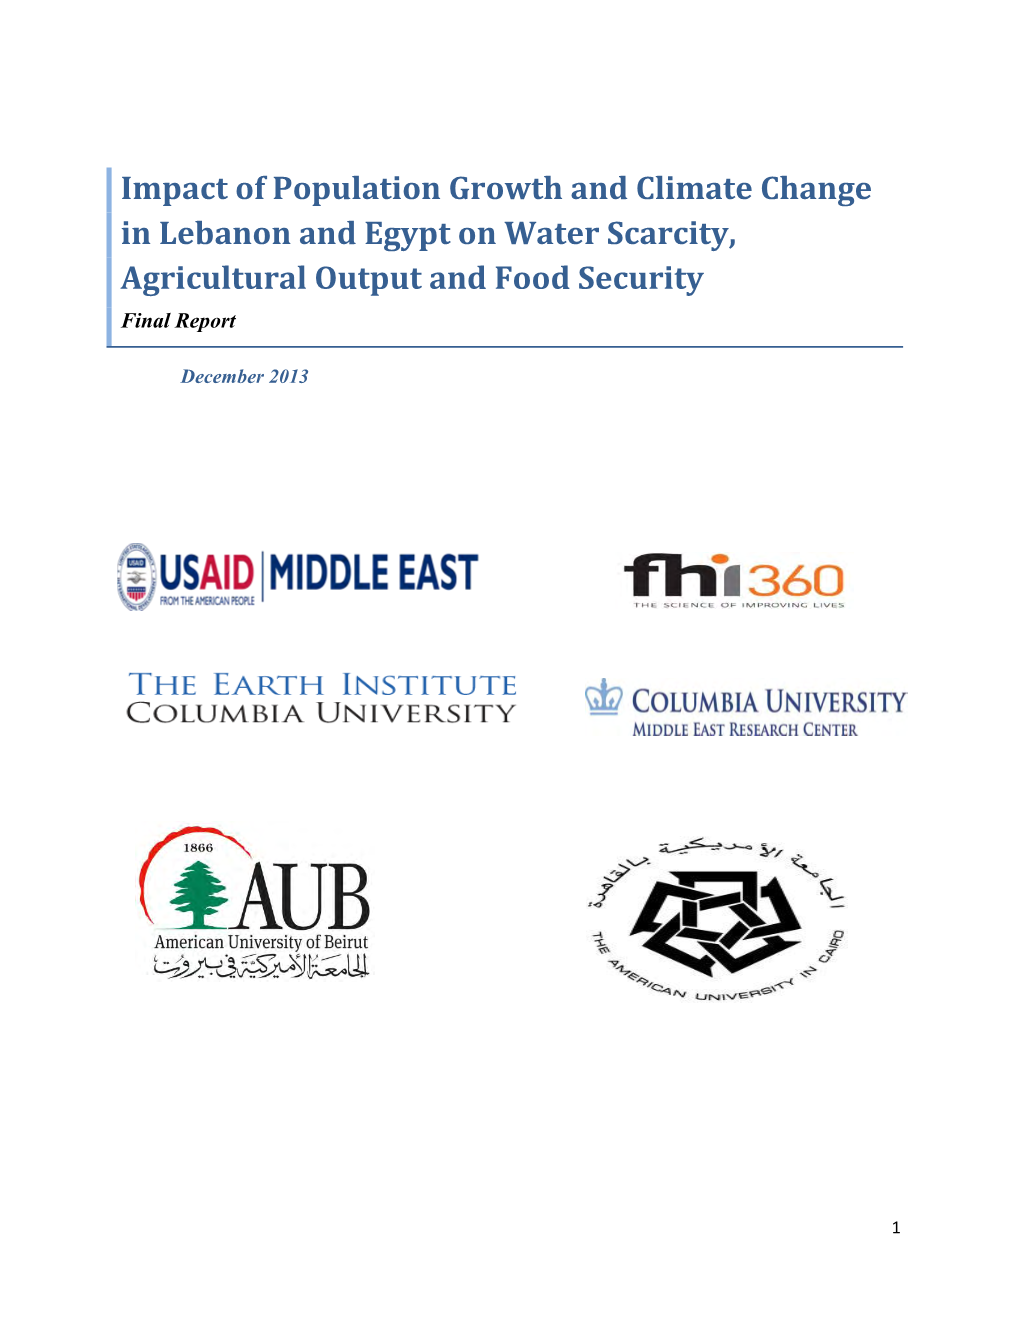 Impact of Population Growth and Climate Change in Lebanon and Egypt on Water Scarcity, Agricultural Output and Food Security Final Report